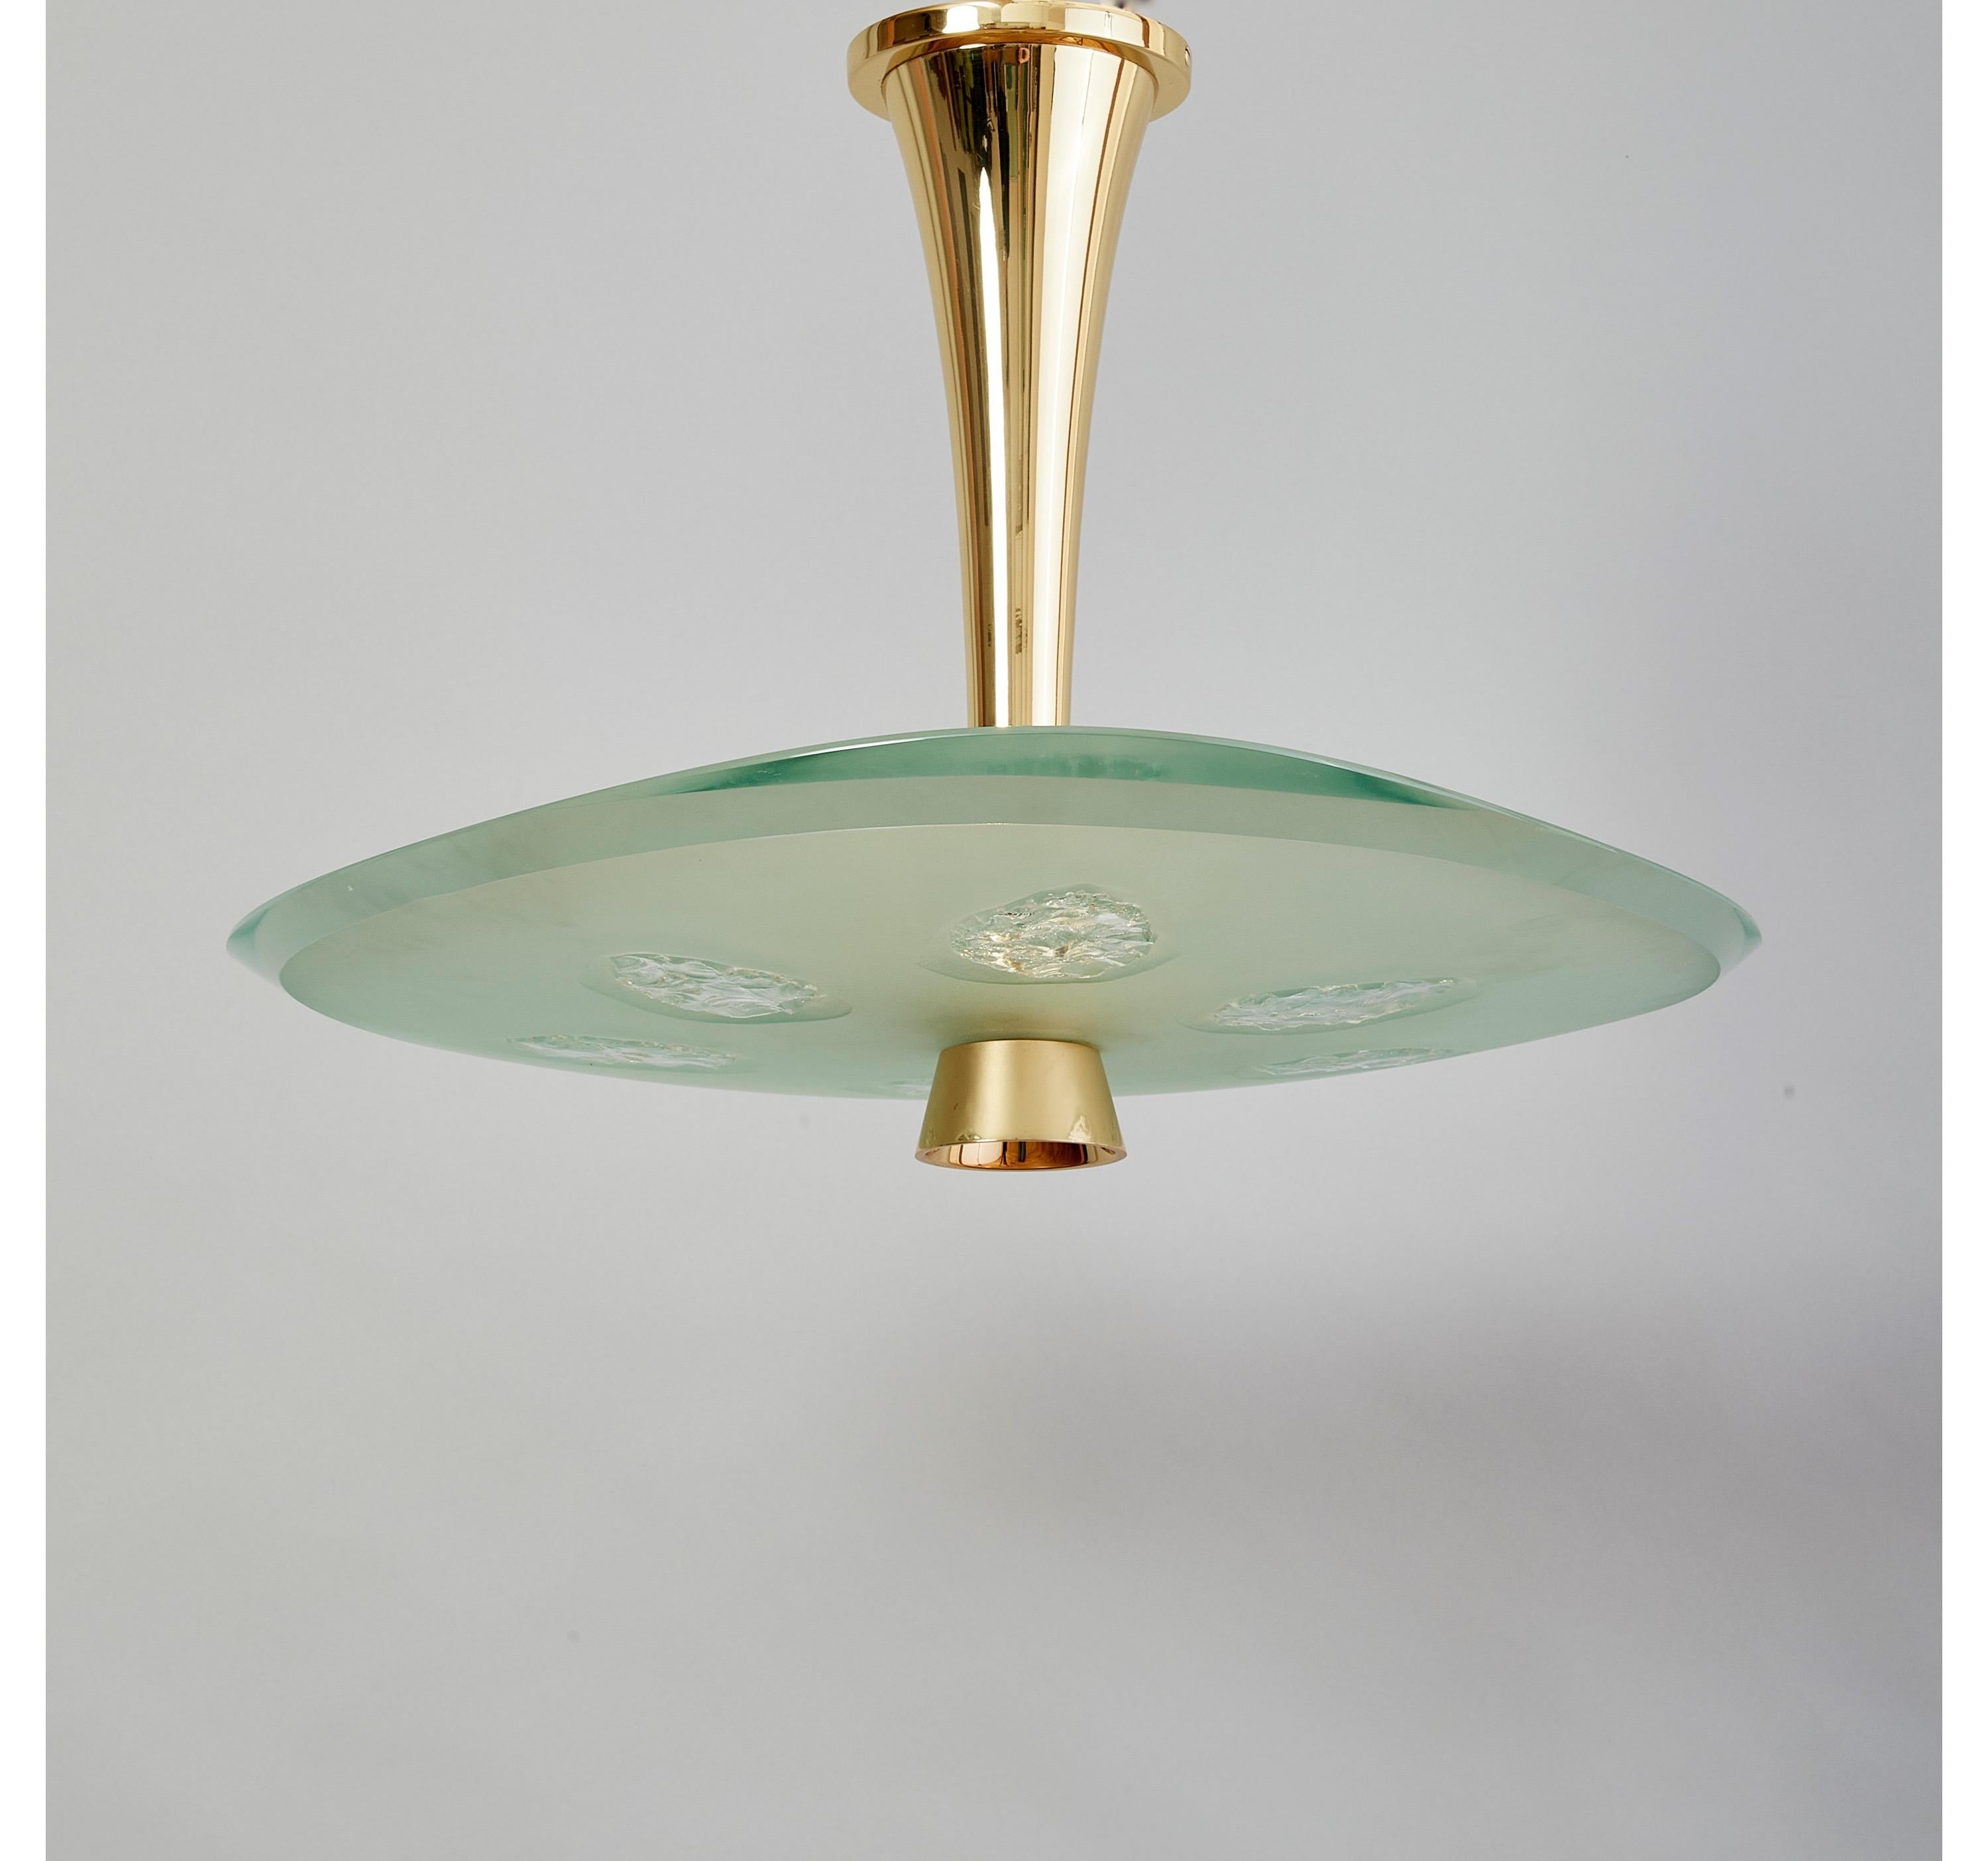 Mid-20th Century Superb Max Ingrand for Fontana Arte Chandelier in Glass and Brass, Italy c. 1957